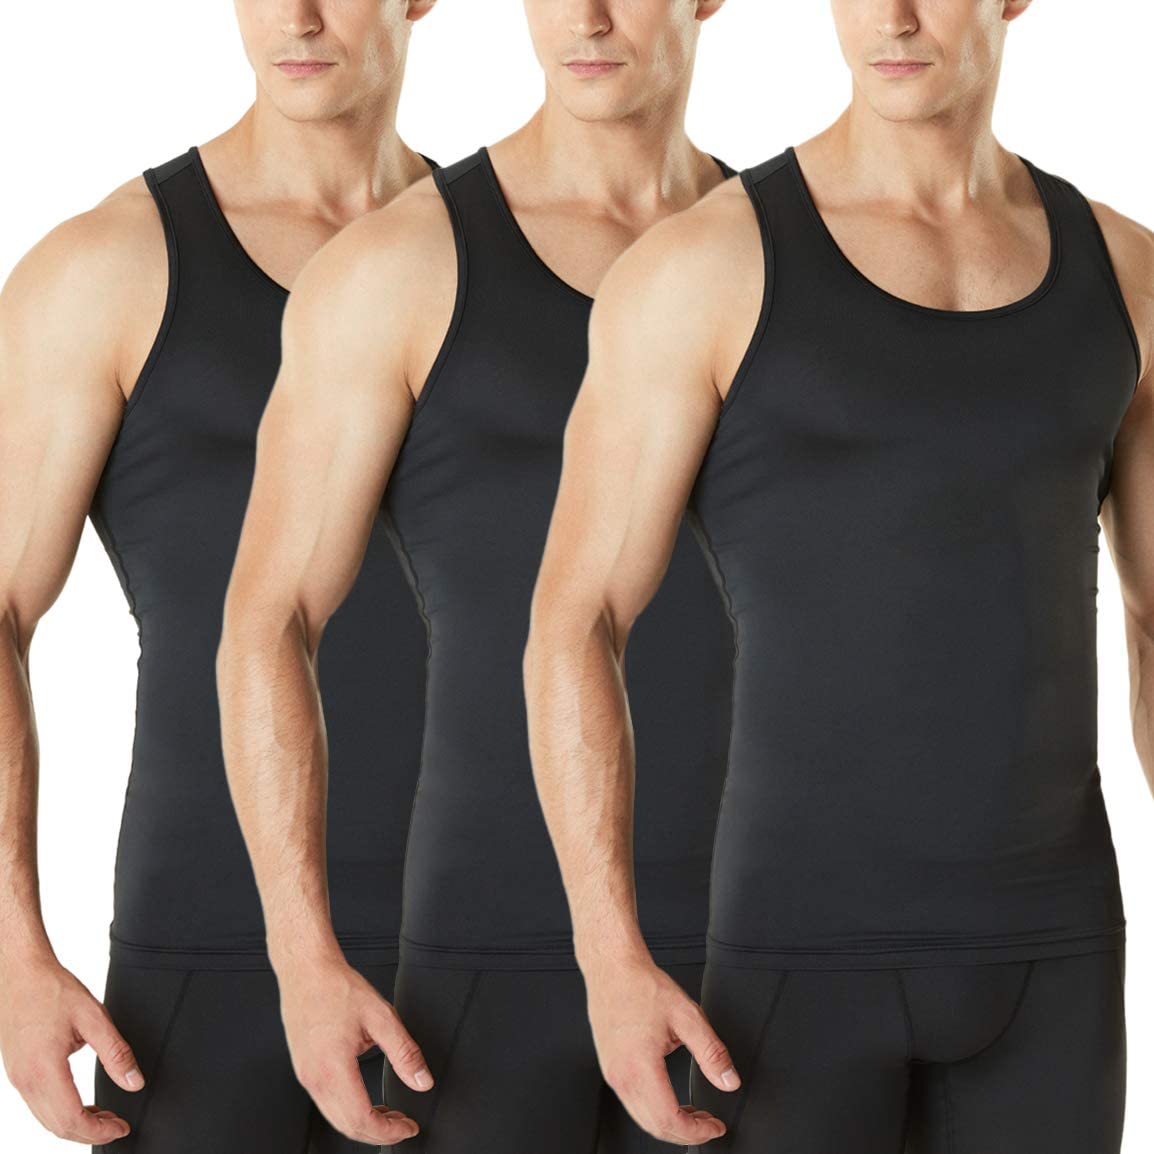 Cool Dry Sports Details about   TSLA 1 or 3 Pack Men's Athletic Compression Sleeveless Tank Top 